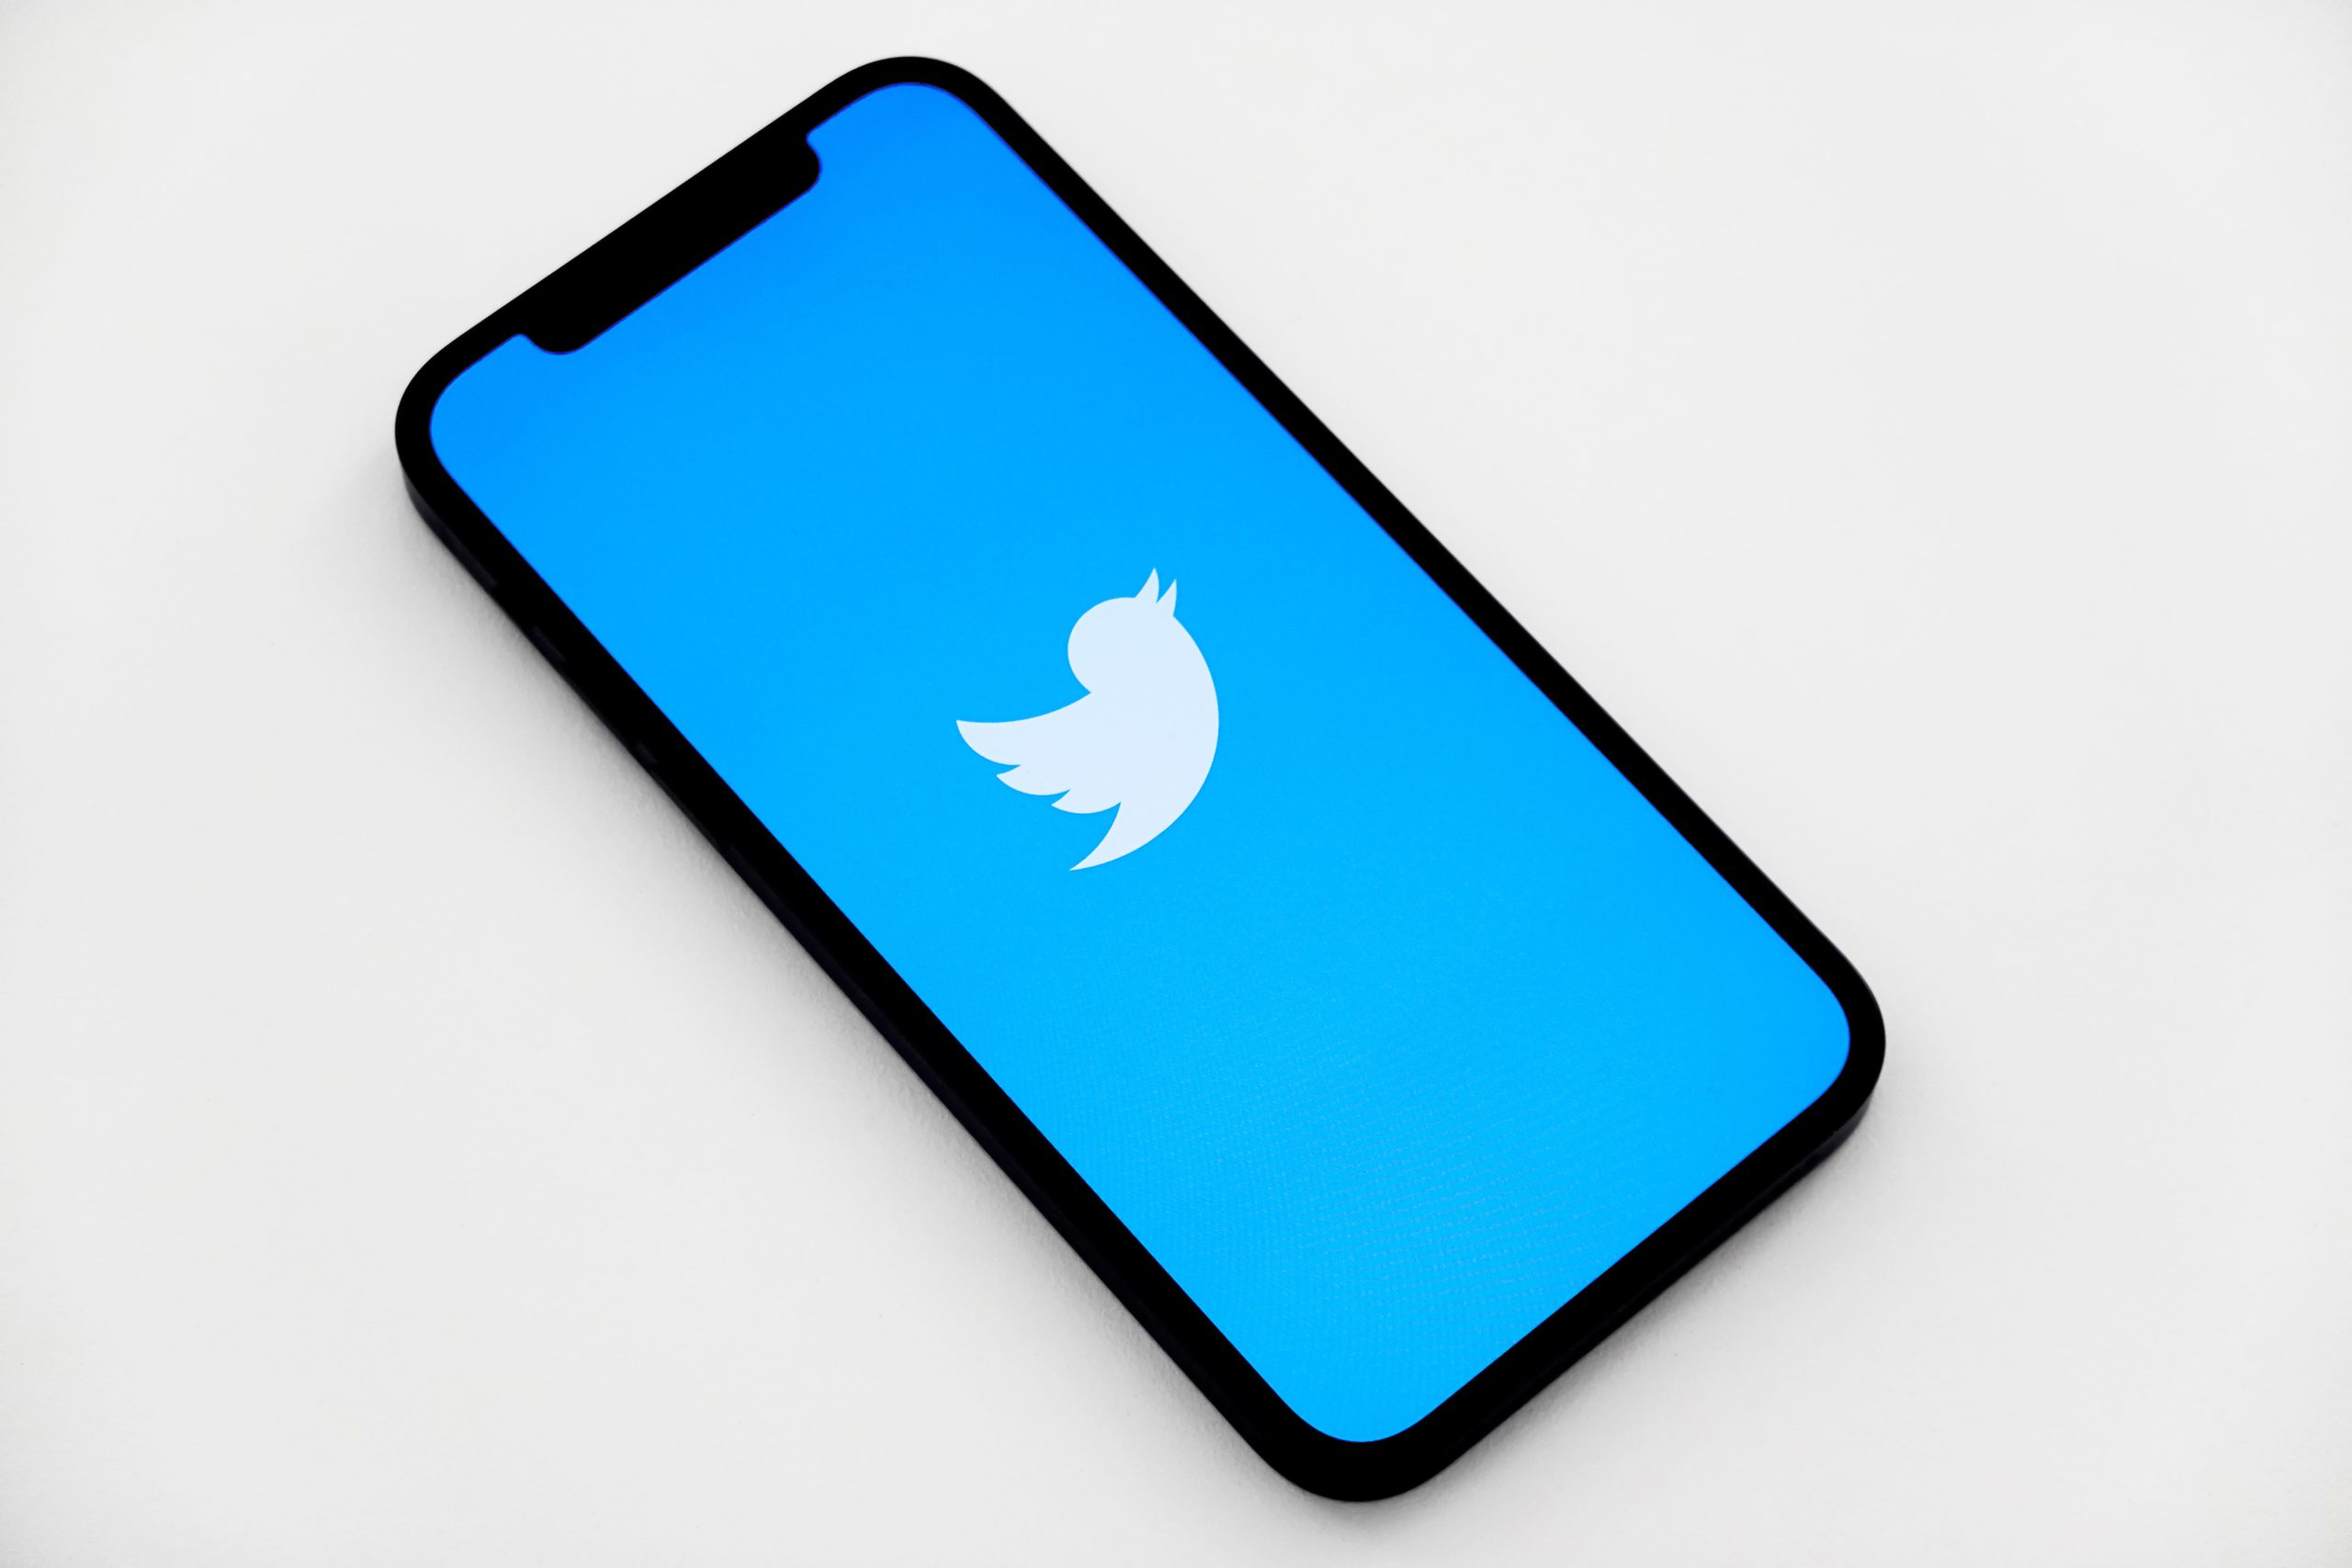 Twitter India appoints a California-based grievance redressal officer after local officer quits